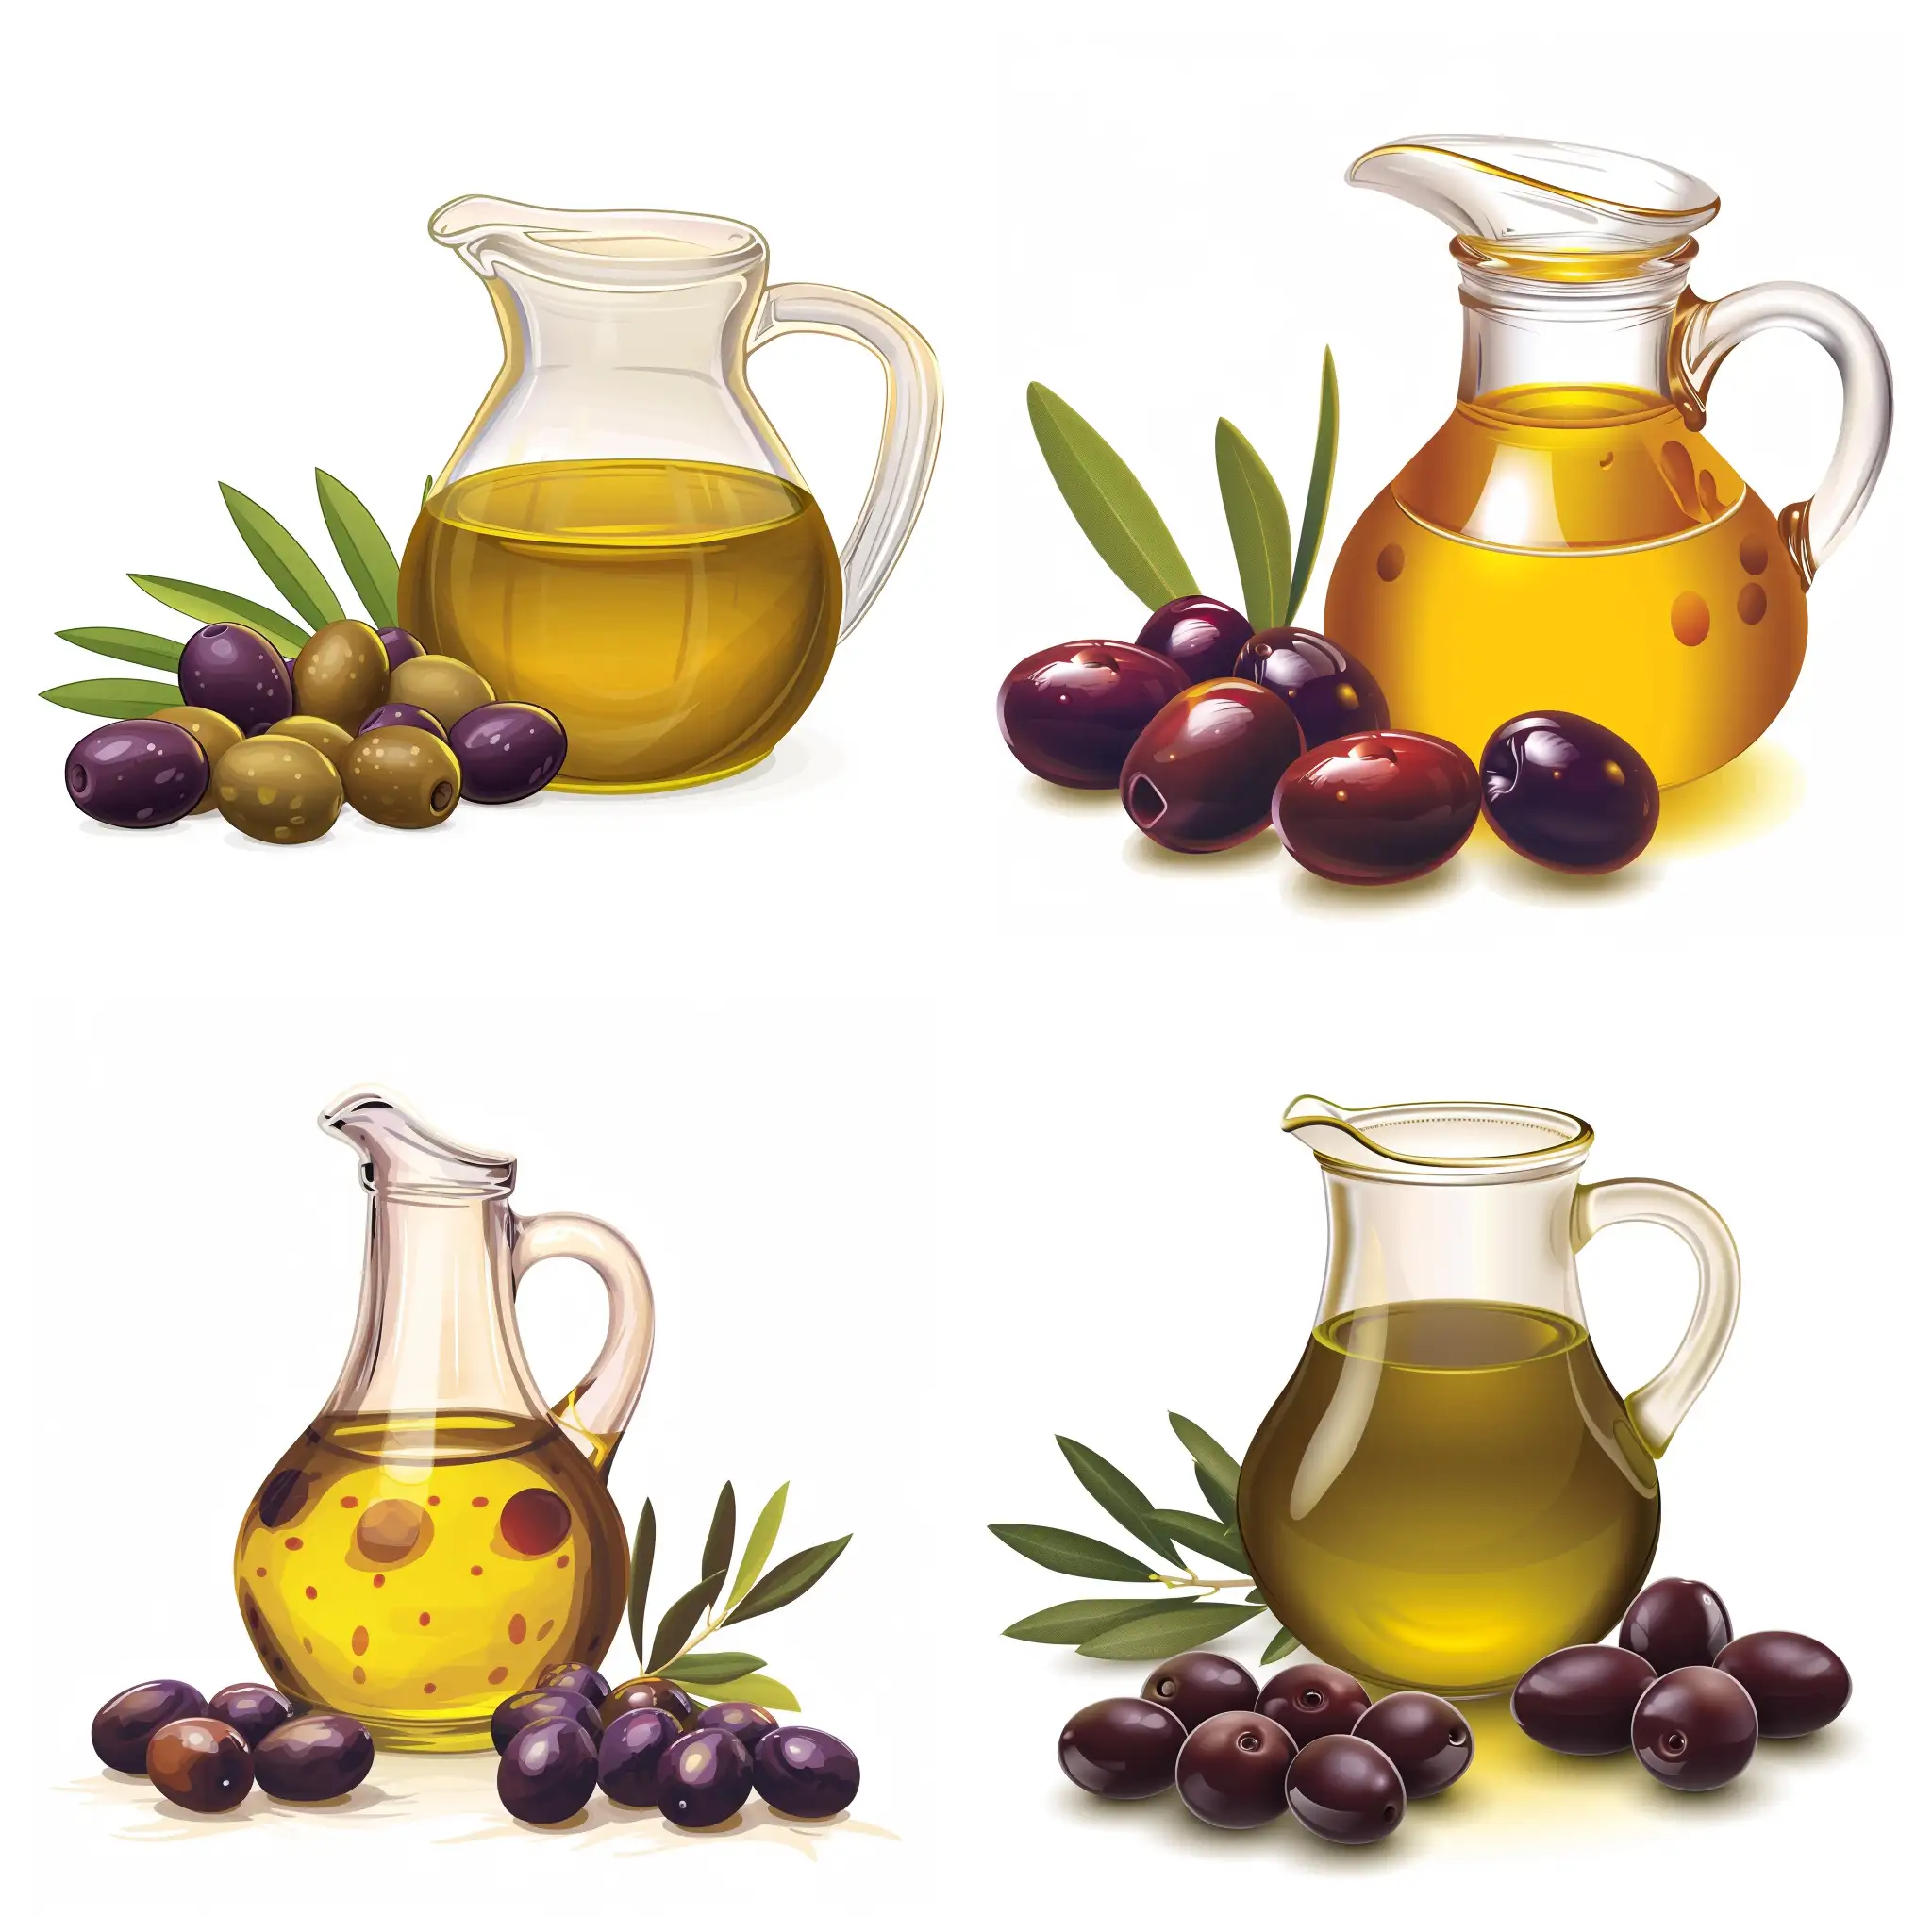 a beautiful jug of olive oil, next to several olives, in vector style